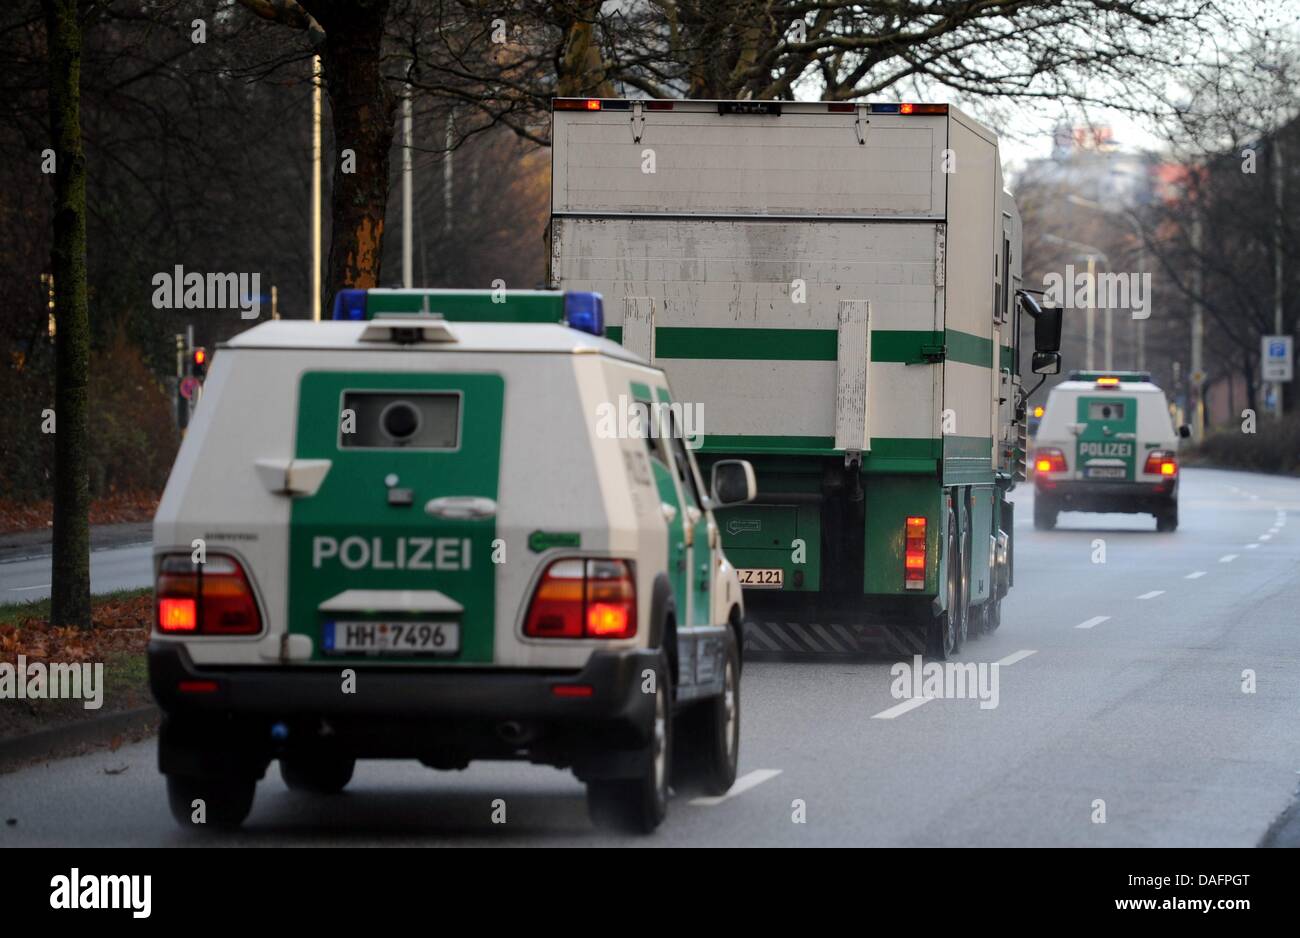 A money transporter is accompanied by police vans in Kiel, Germany, 08  December 2011. The transporters' routes and contents are top secret. Photo:  Carsten Rehder Stock Photo - Alamy